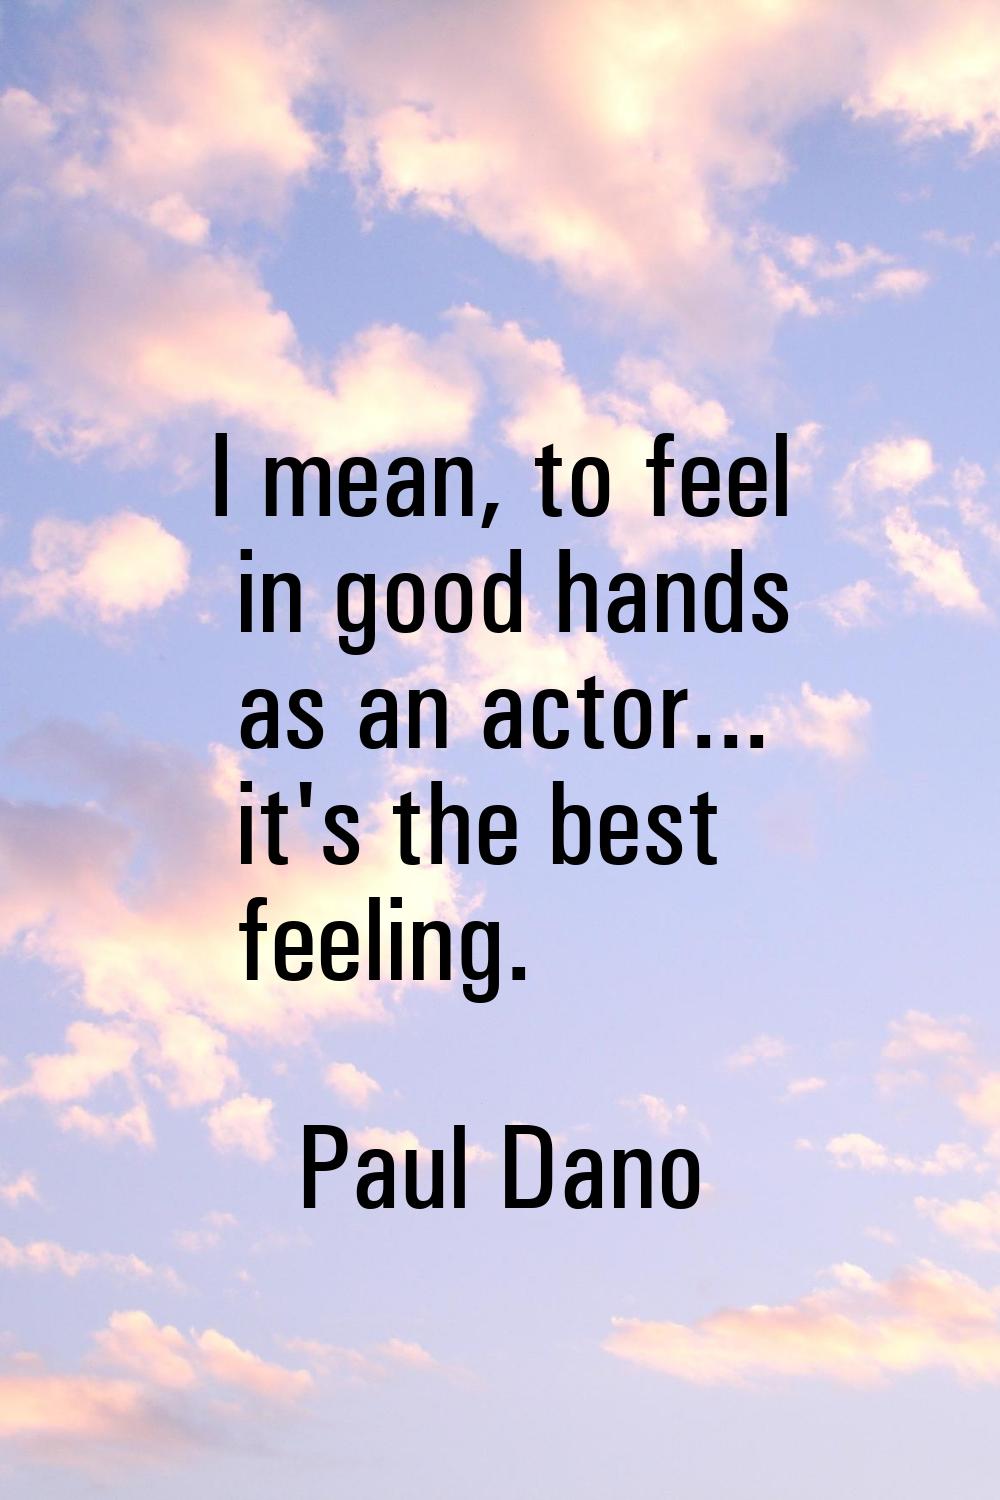 I mean, to feel in good hands as an actor... it's the best feeling.